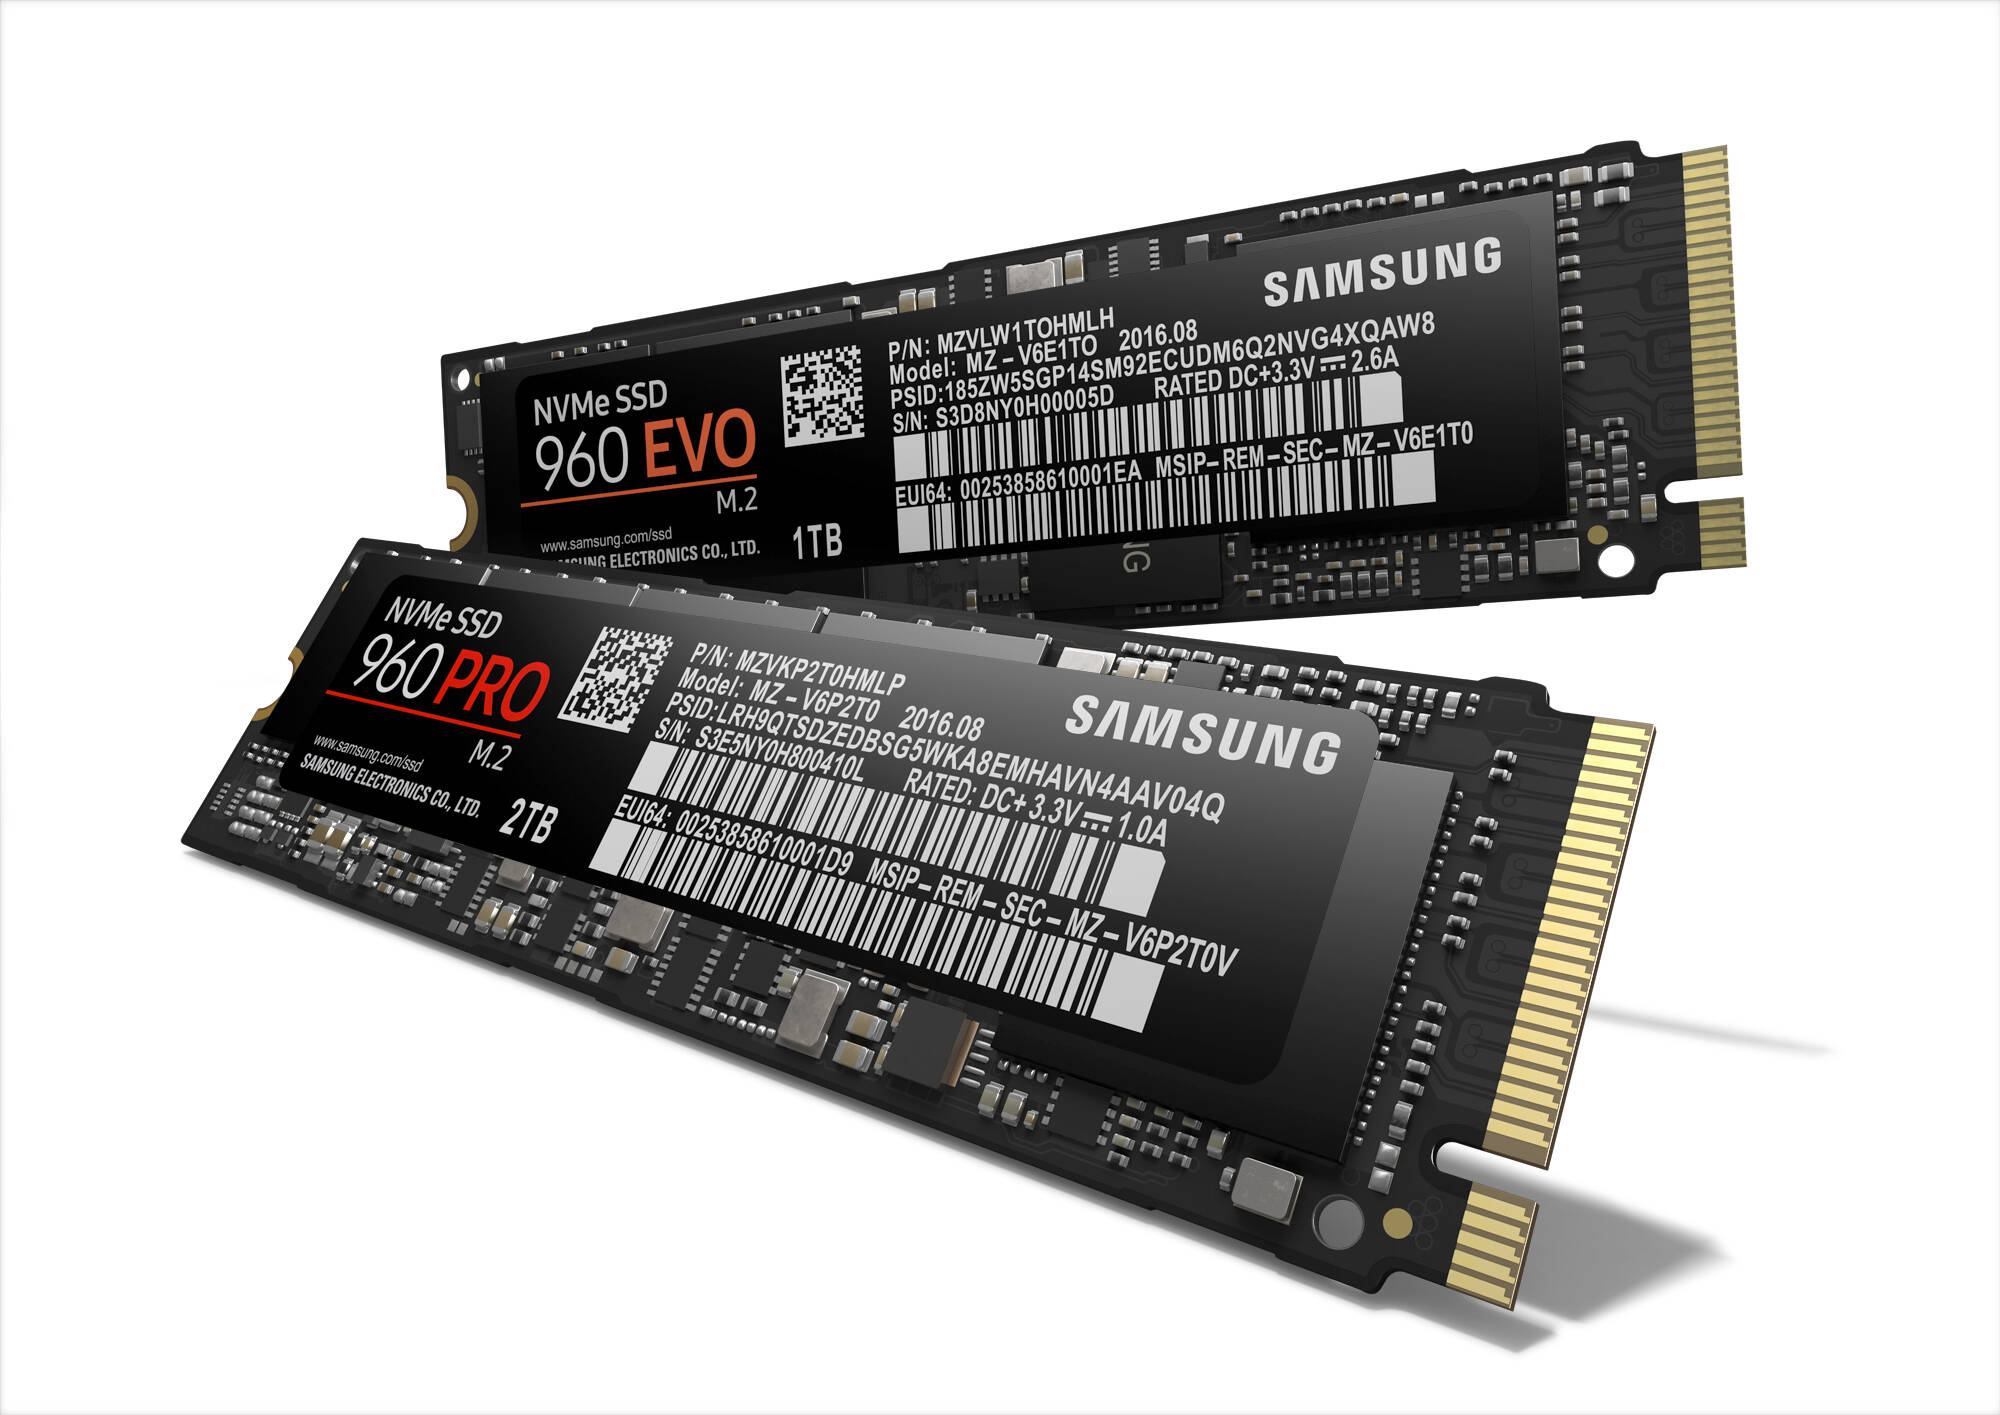 Specialty teacher mythology Windows 11 users complain of slow NVMe SSD performance • The Register